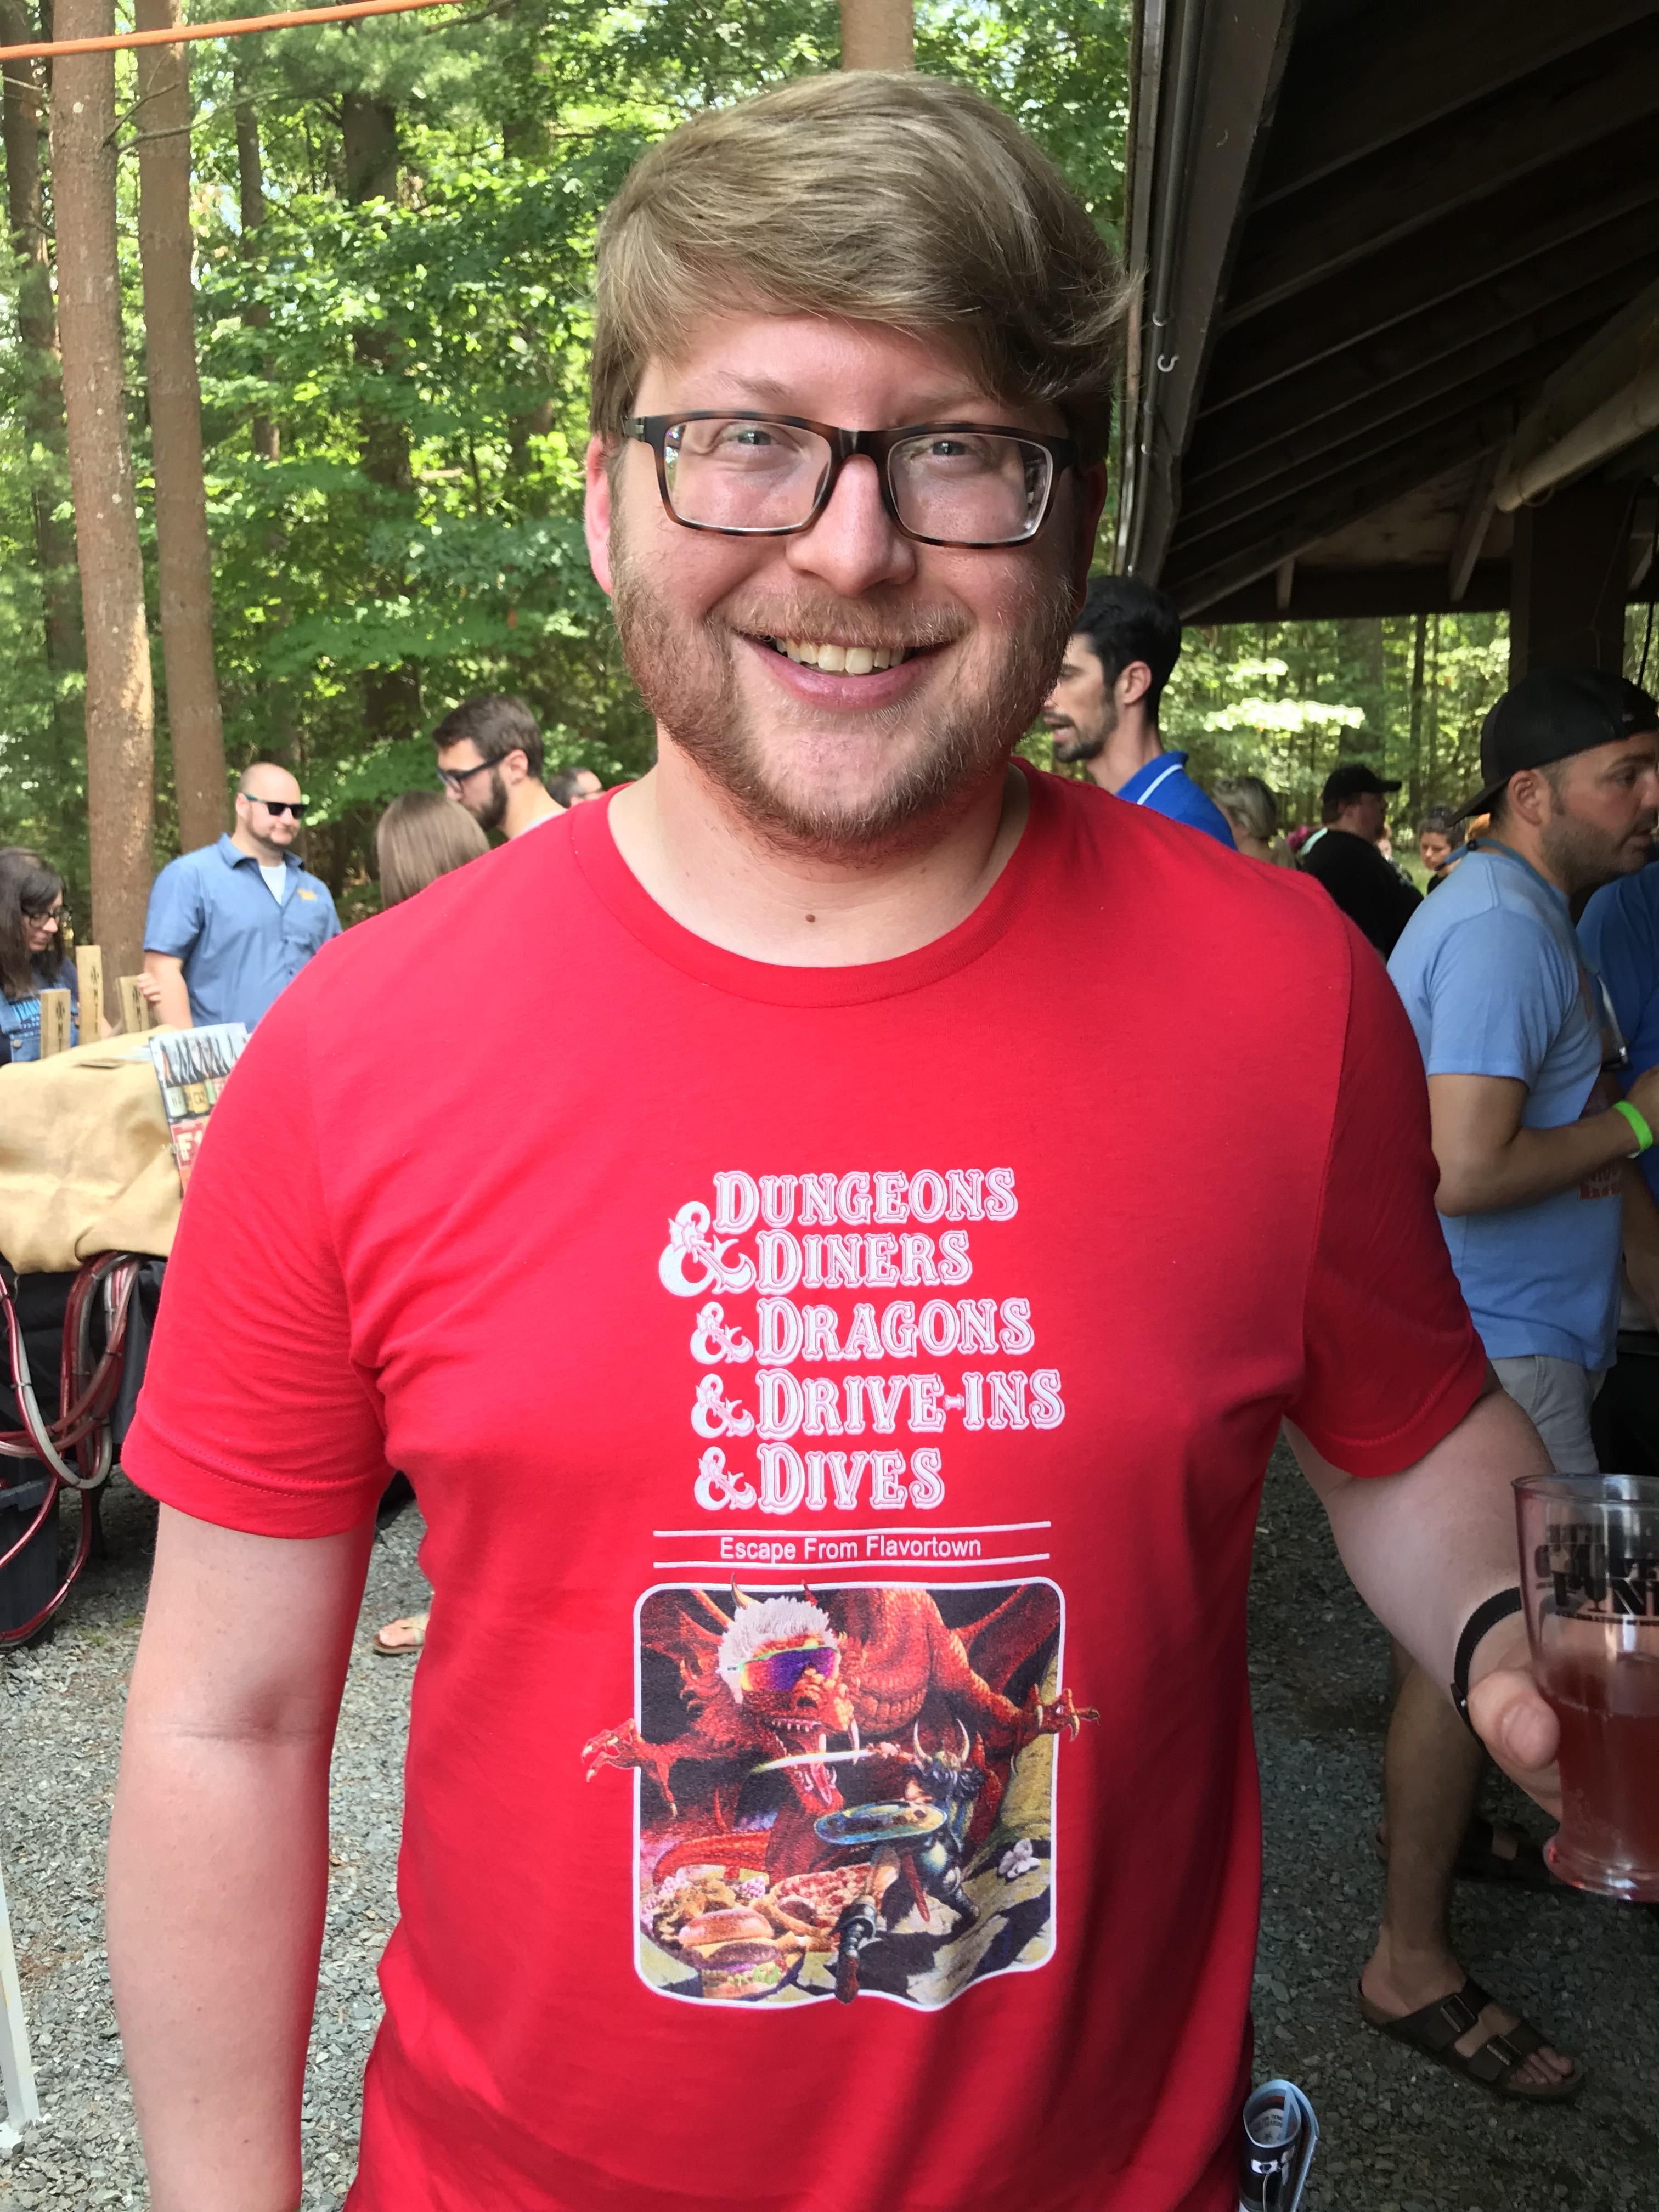 I found this man at a beer fest with this cool shirt